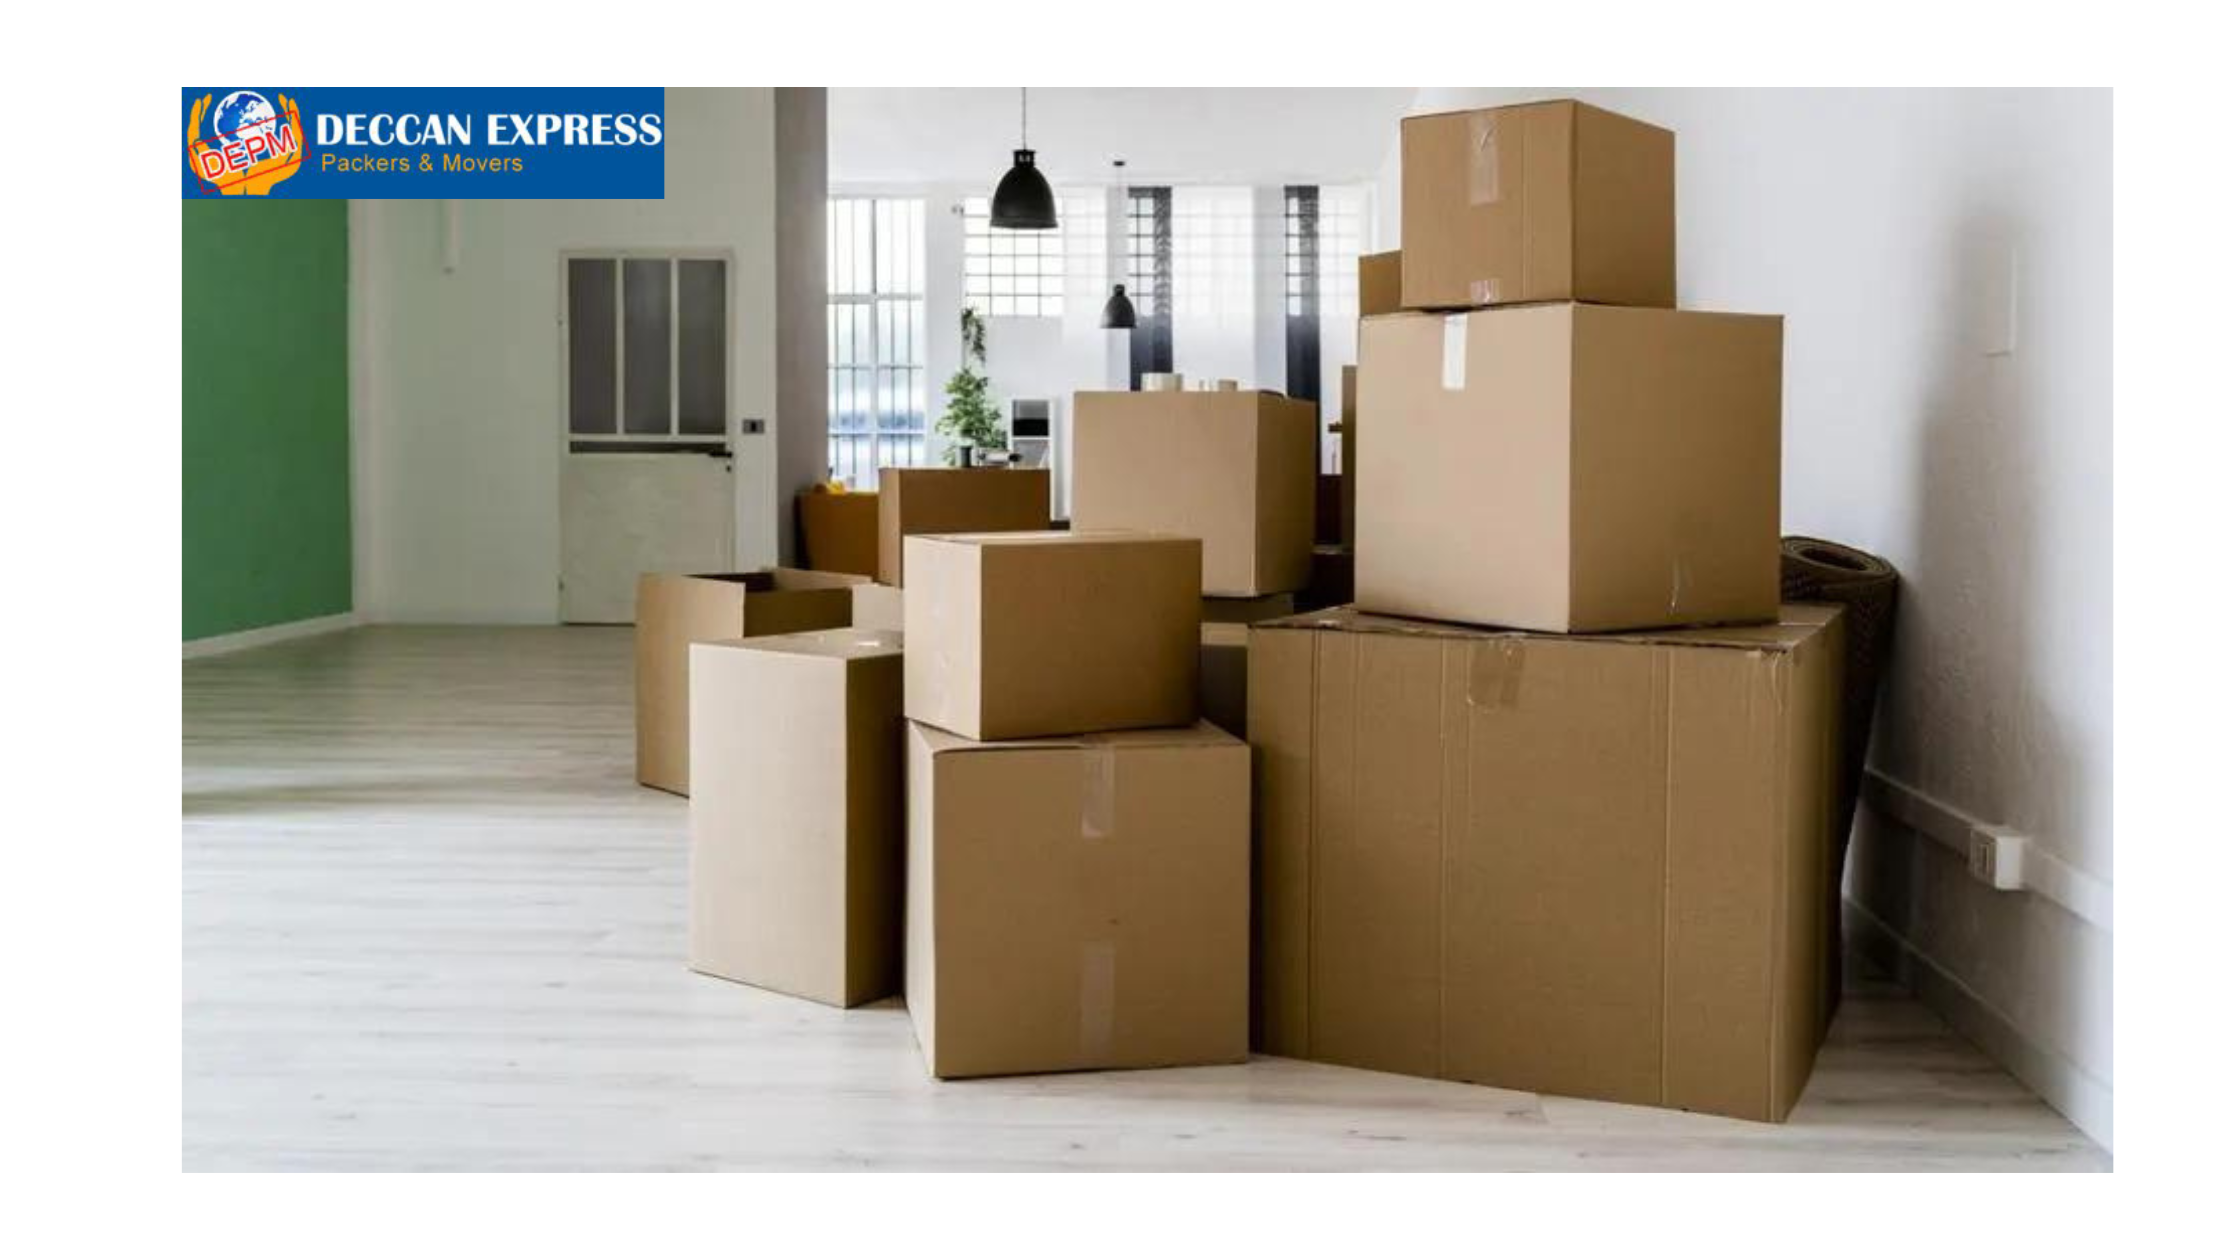 A Step-by-Step Guide on How to Pack Your Belongings for a Move